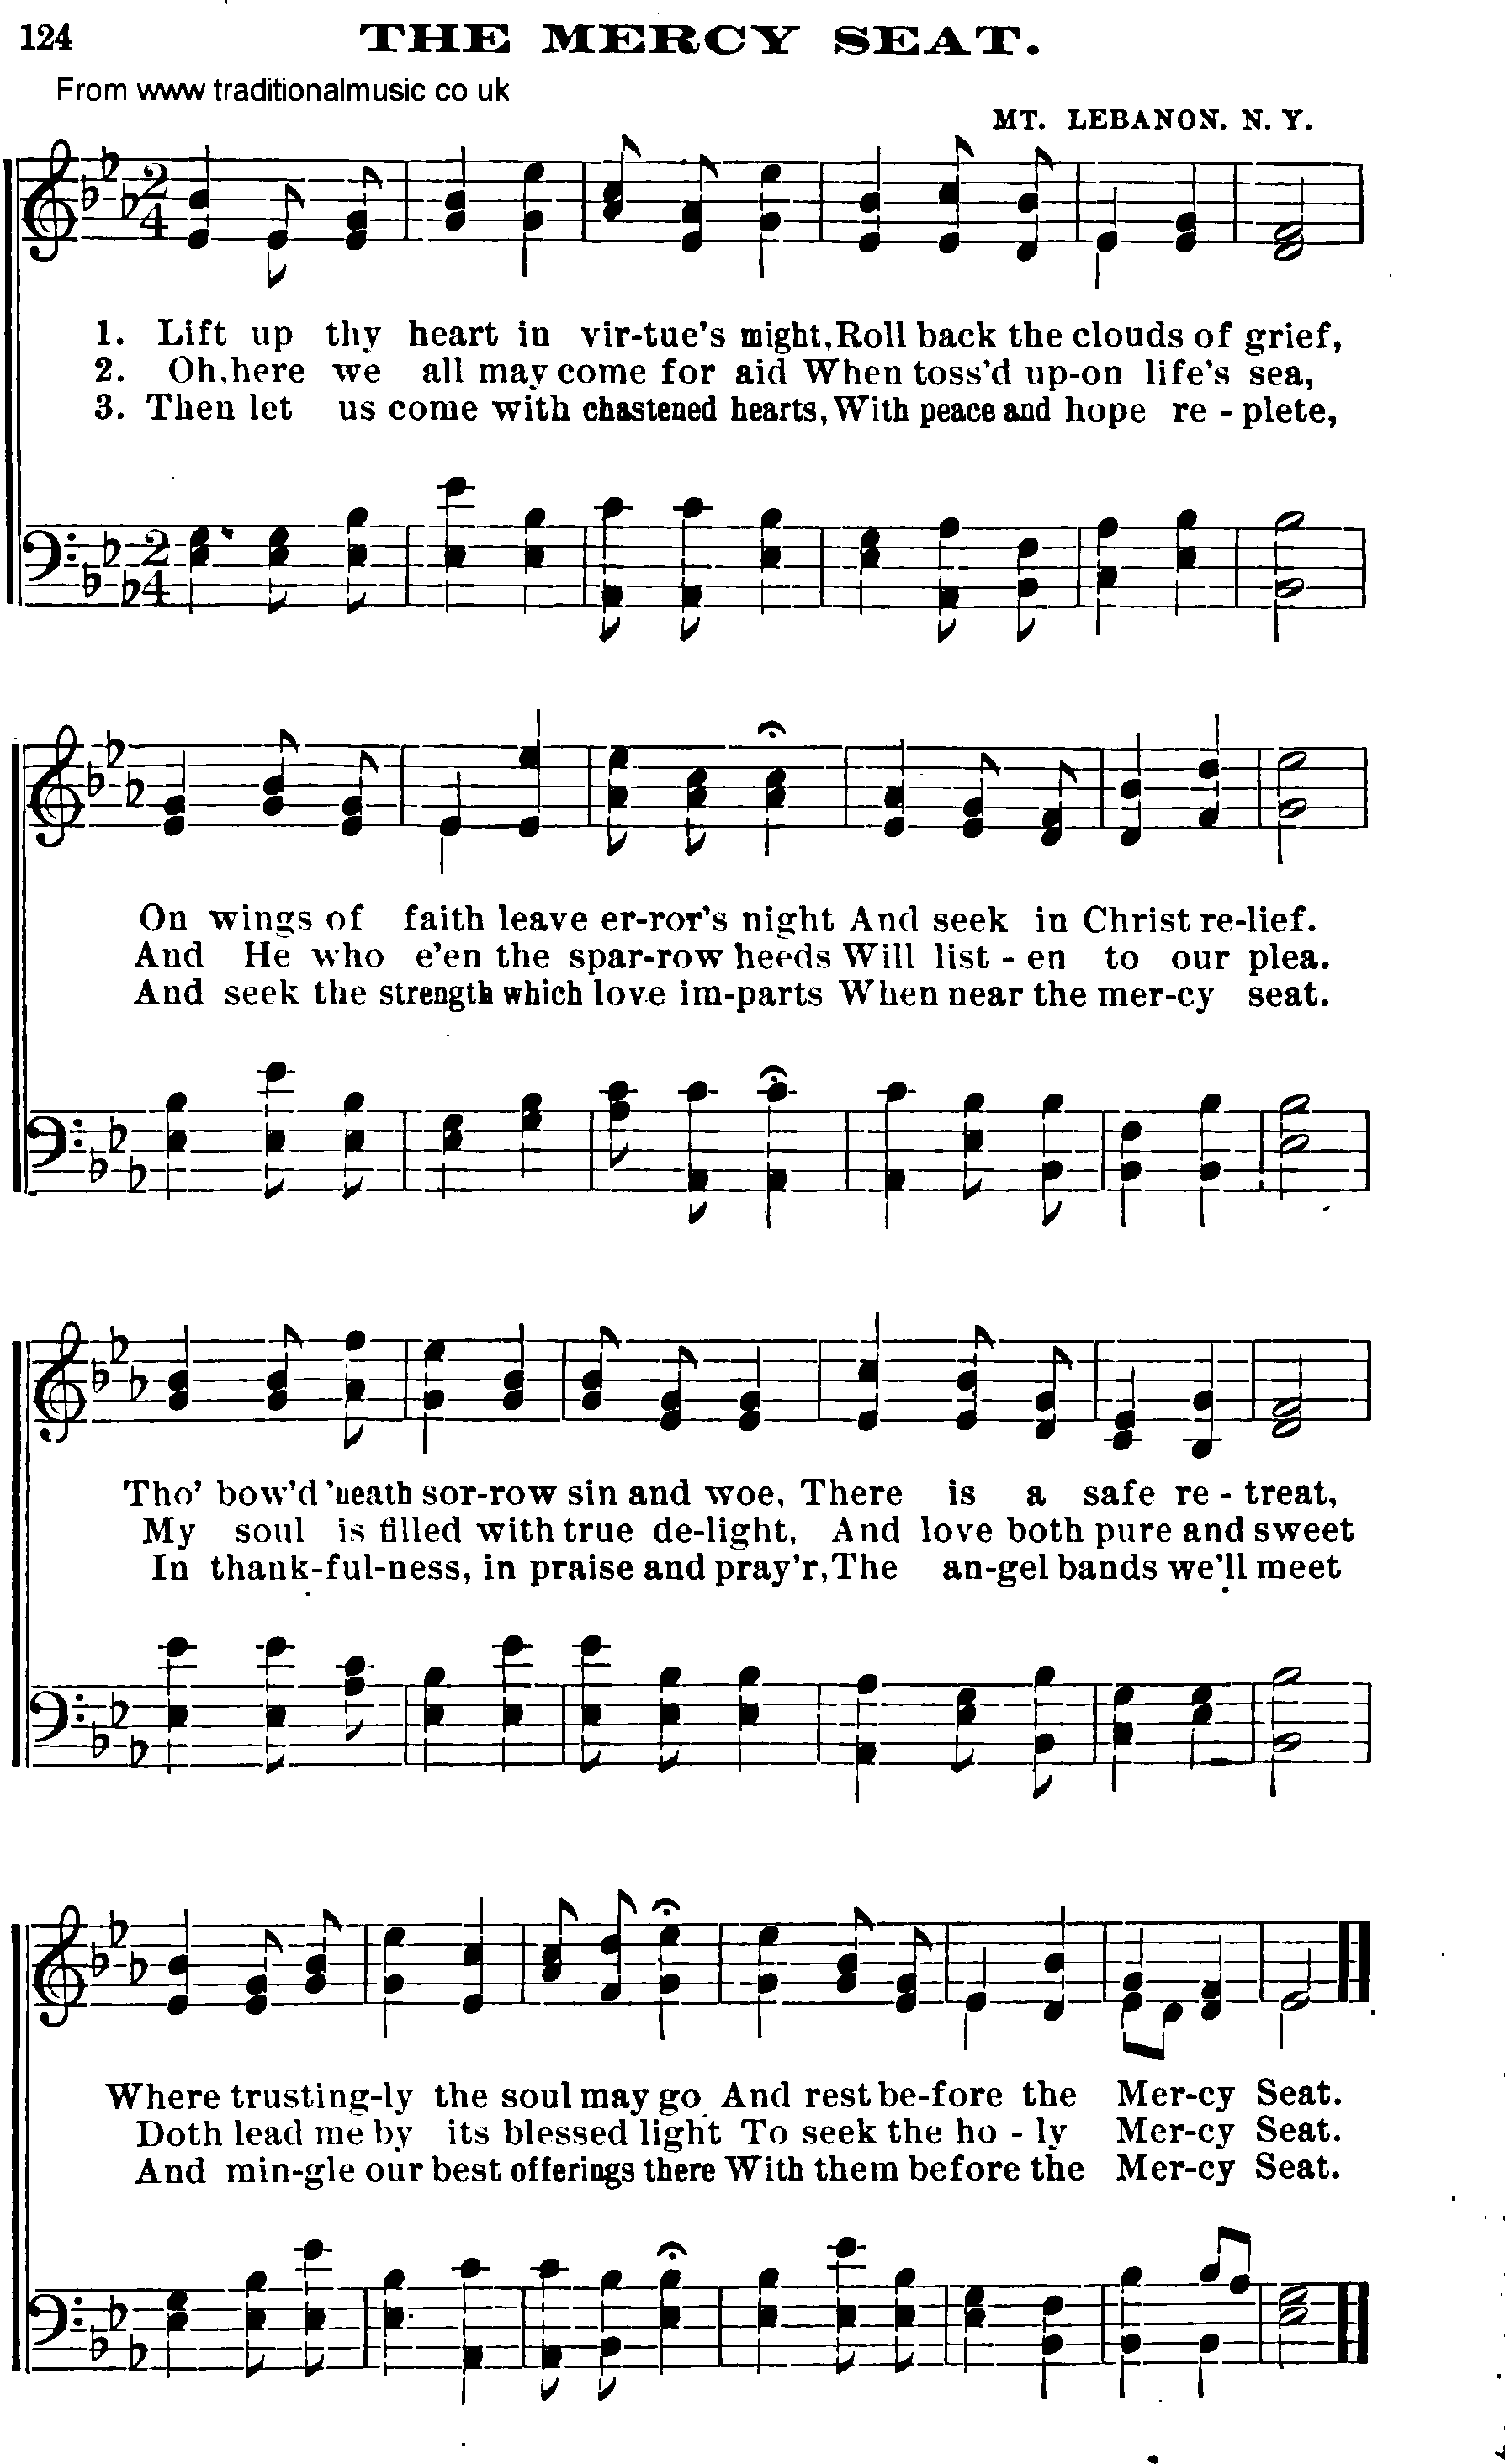 Shaker Music collection, Hymn: the mercy seat, sheetmusic and PDF